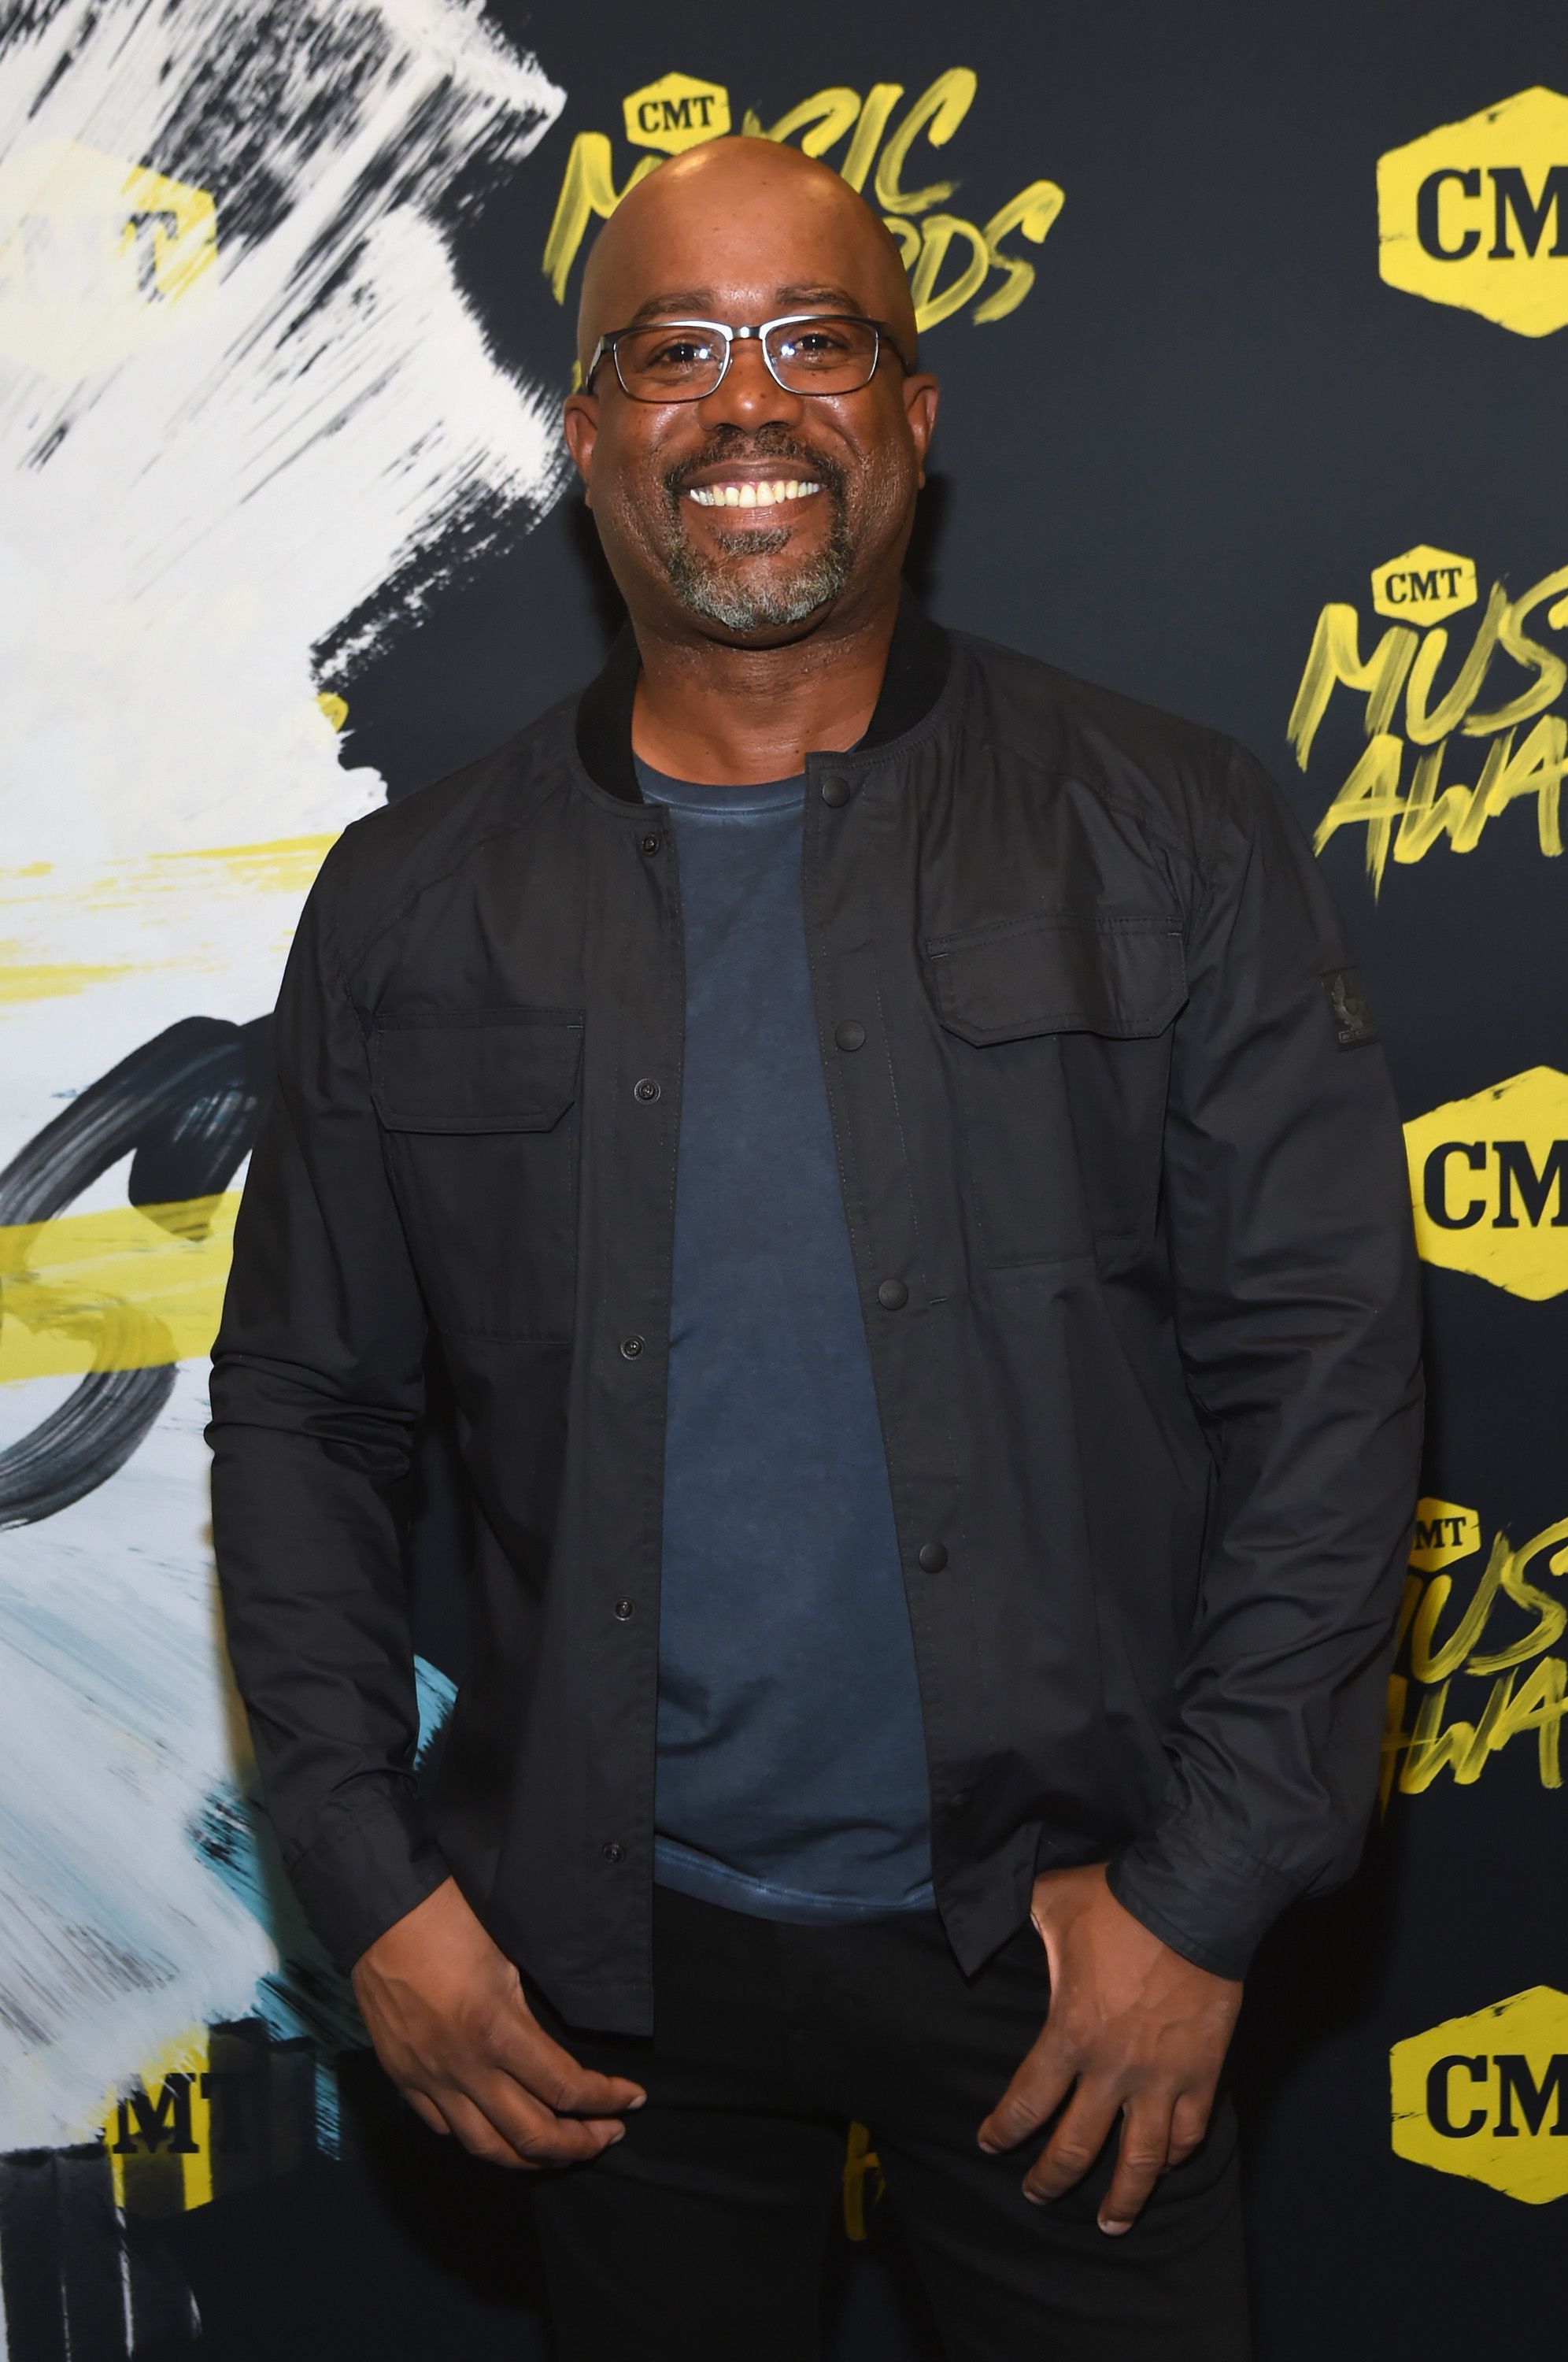 Darius Rucker attends the 2018 CMT Music Awards at Bridgestone Arena on June 6, 2018 in Nashville, Tennessee. | Source: Getty Images